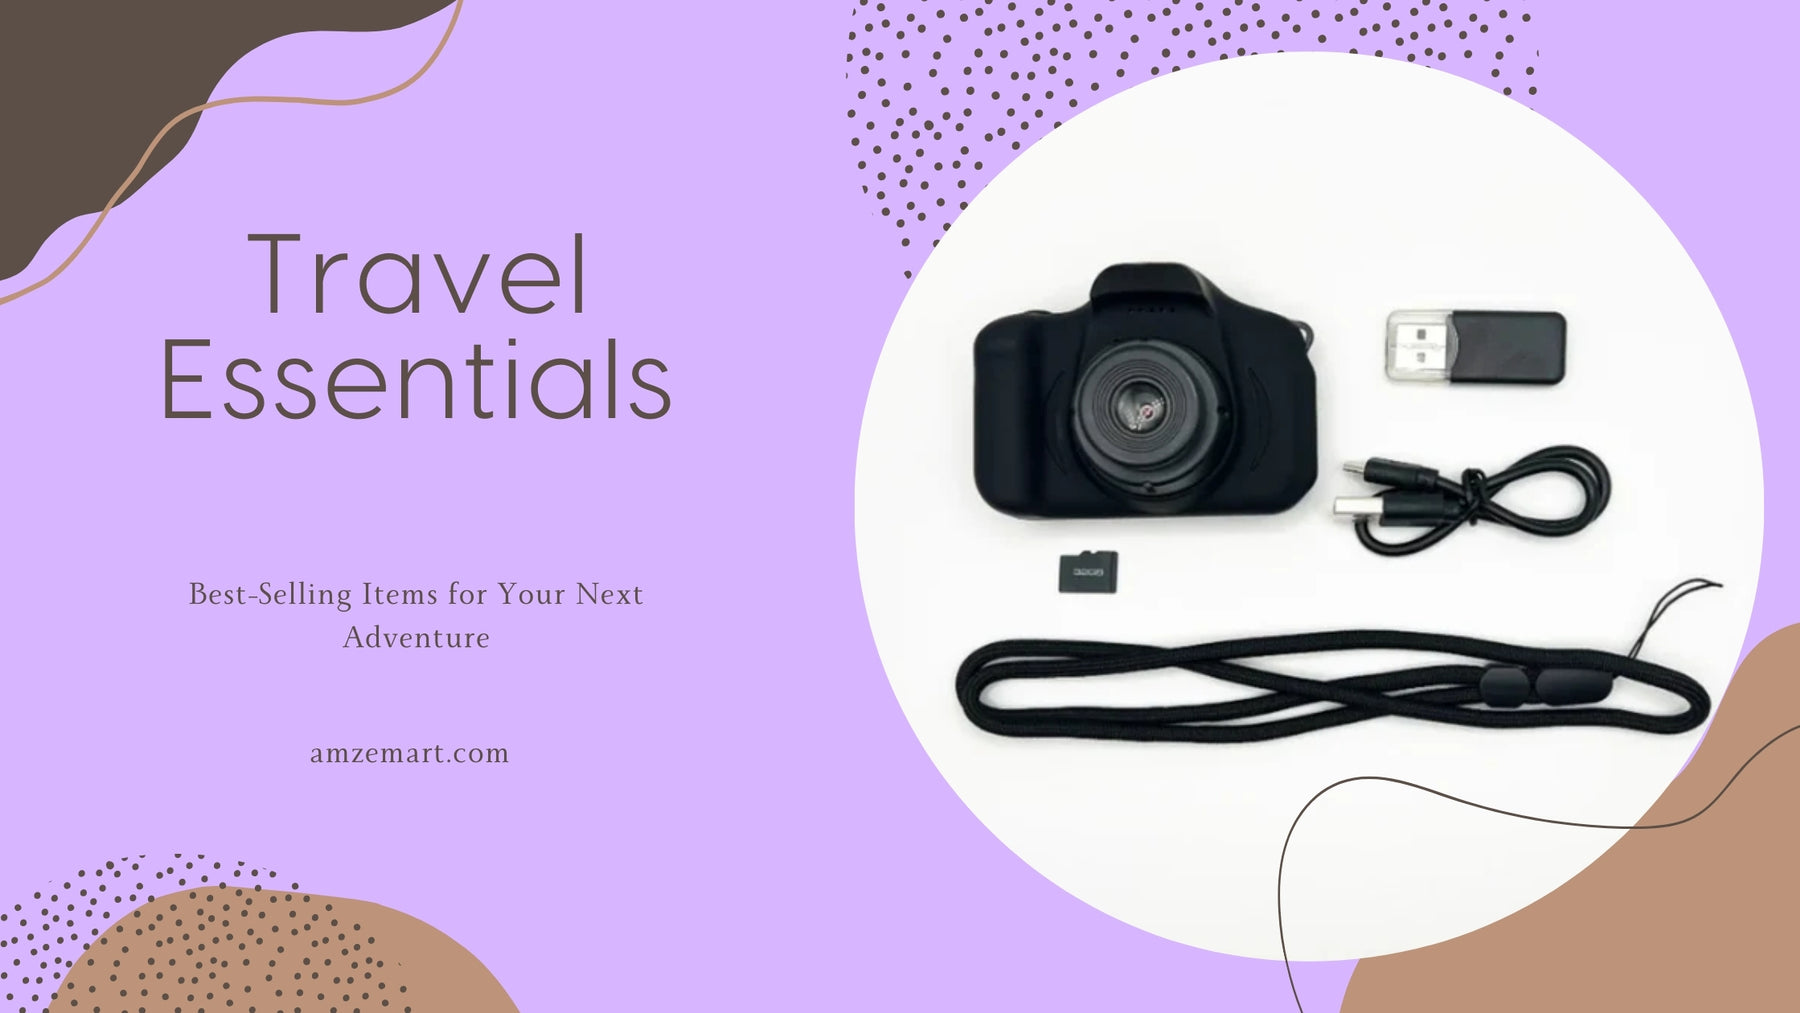 Travel Essentials: Best-Selling Items for Your Next Adventure